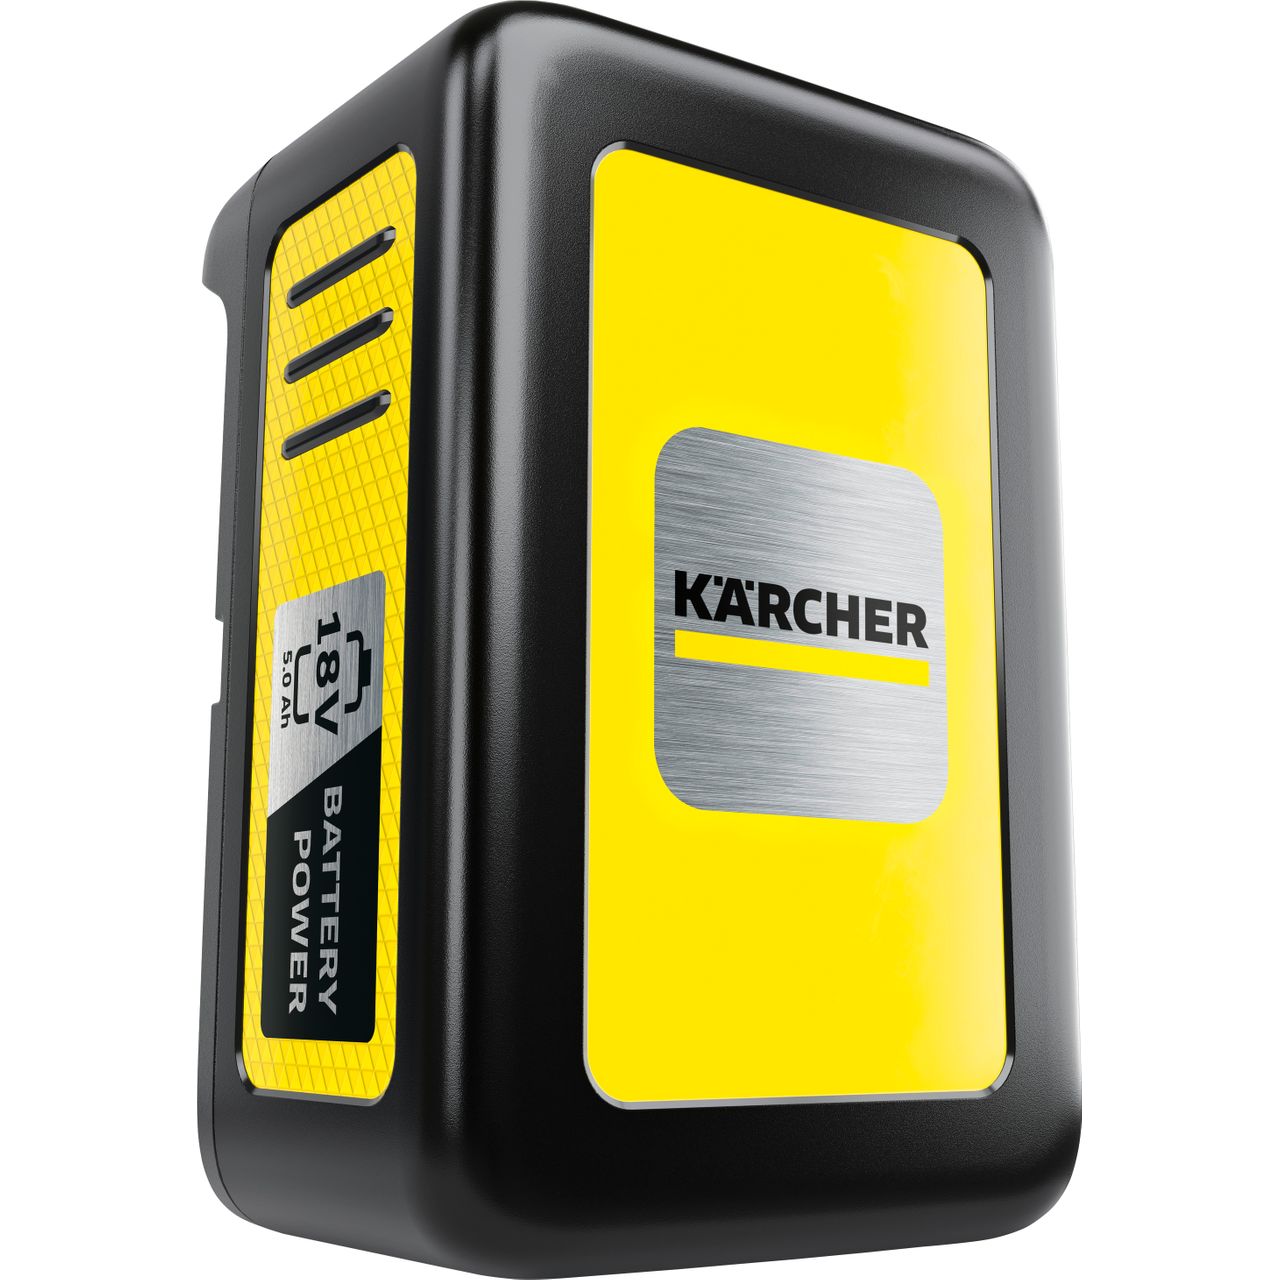 Karcher 18v 5.0Ah Battery 18 Volts Rechargeable Battery Review